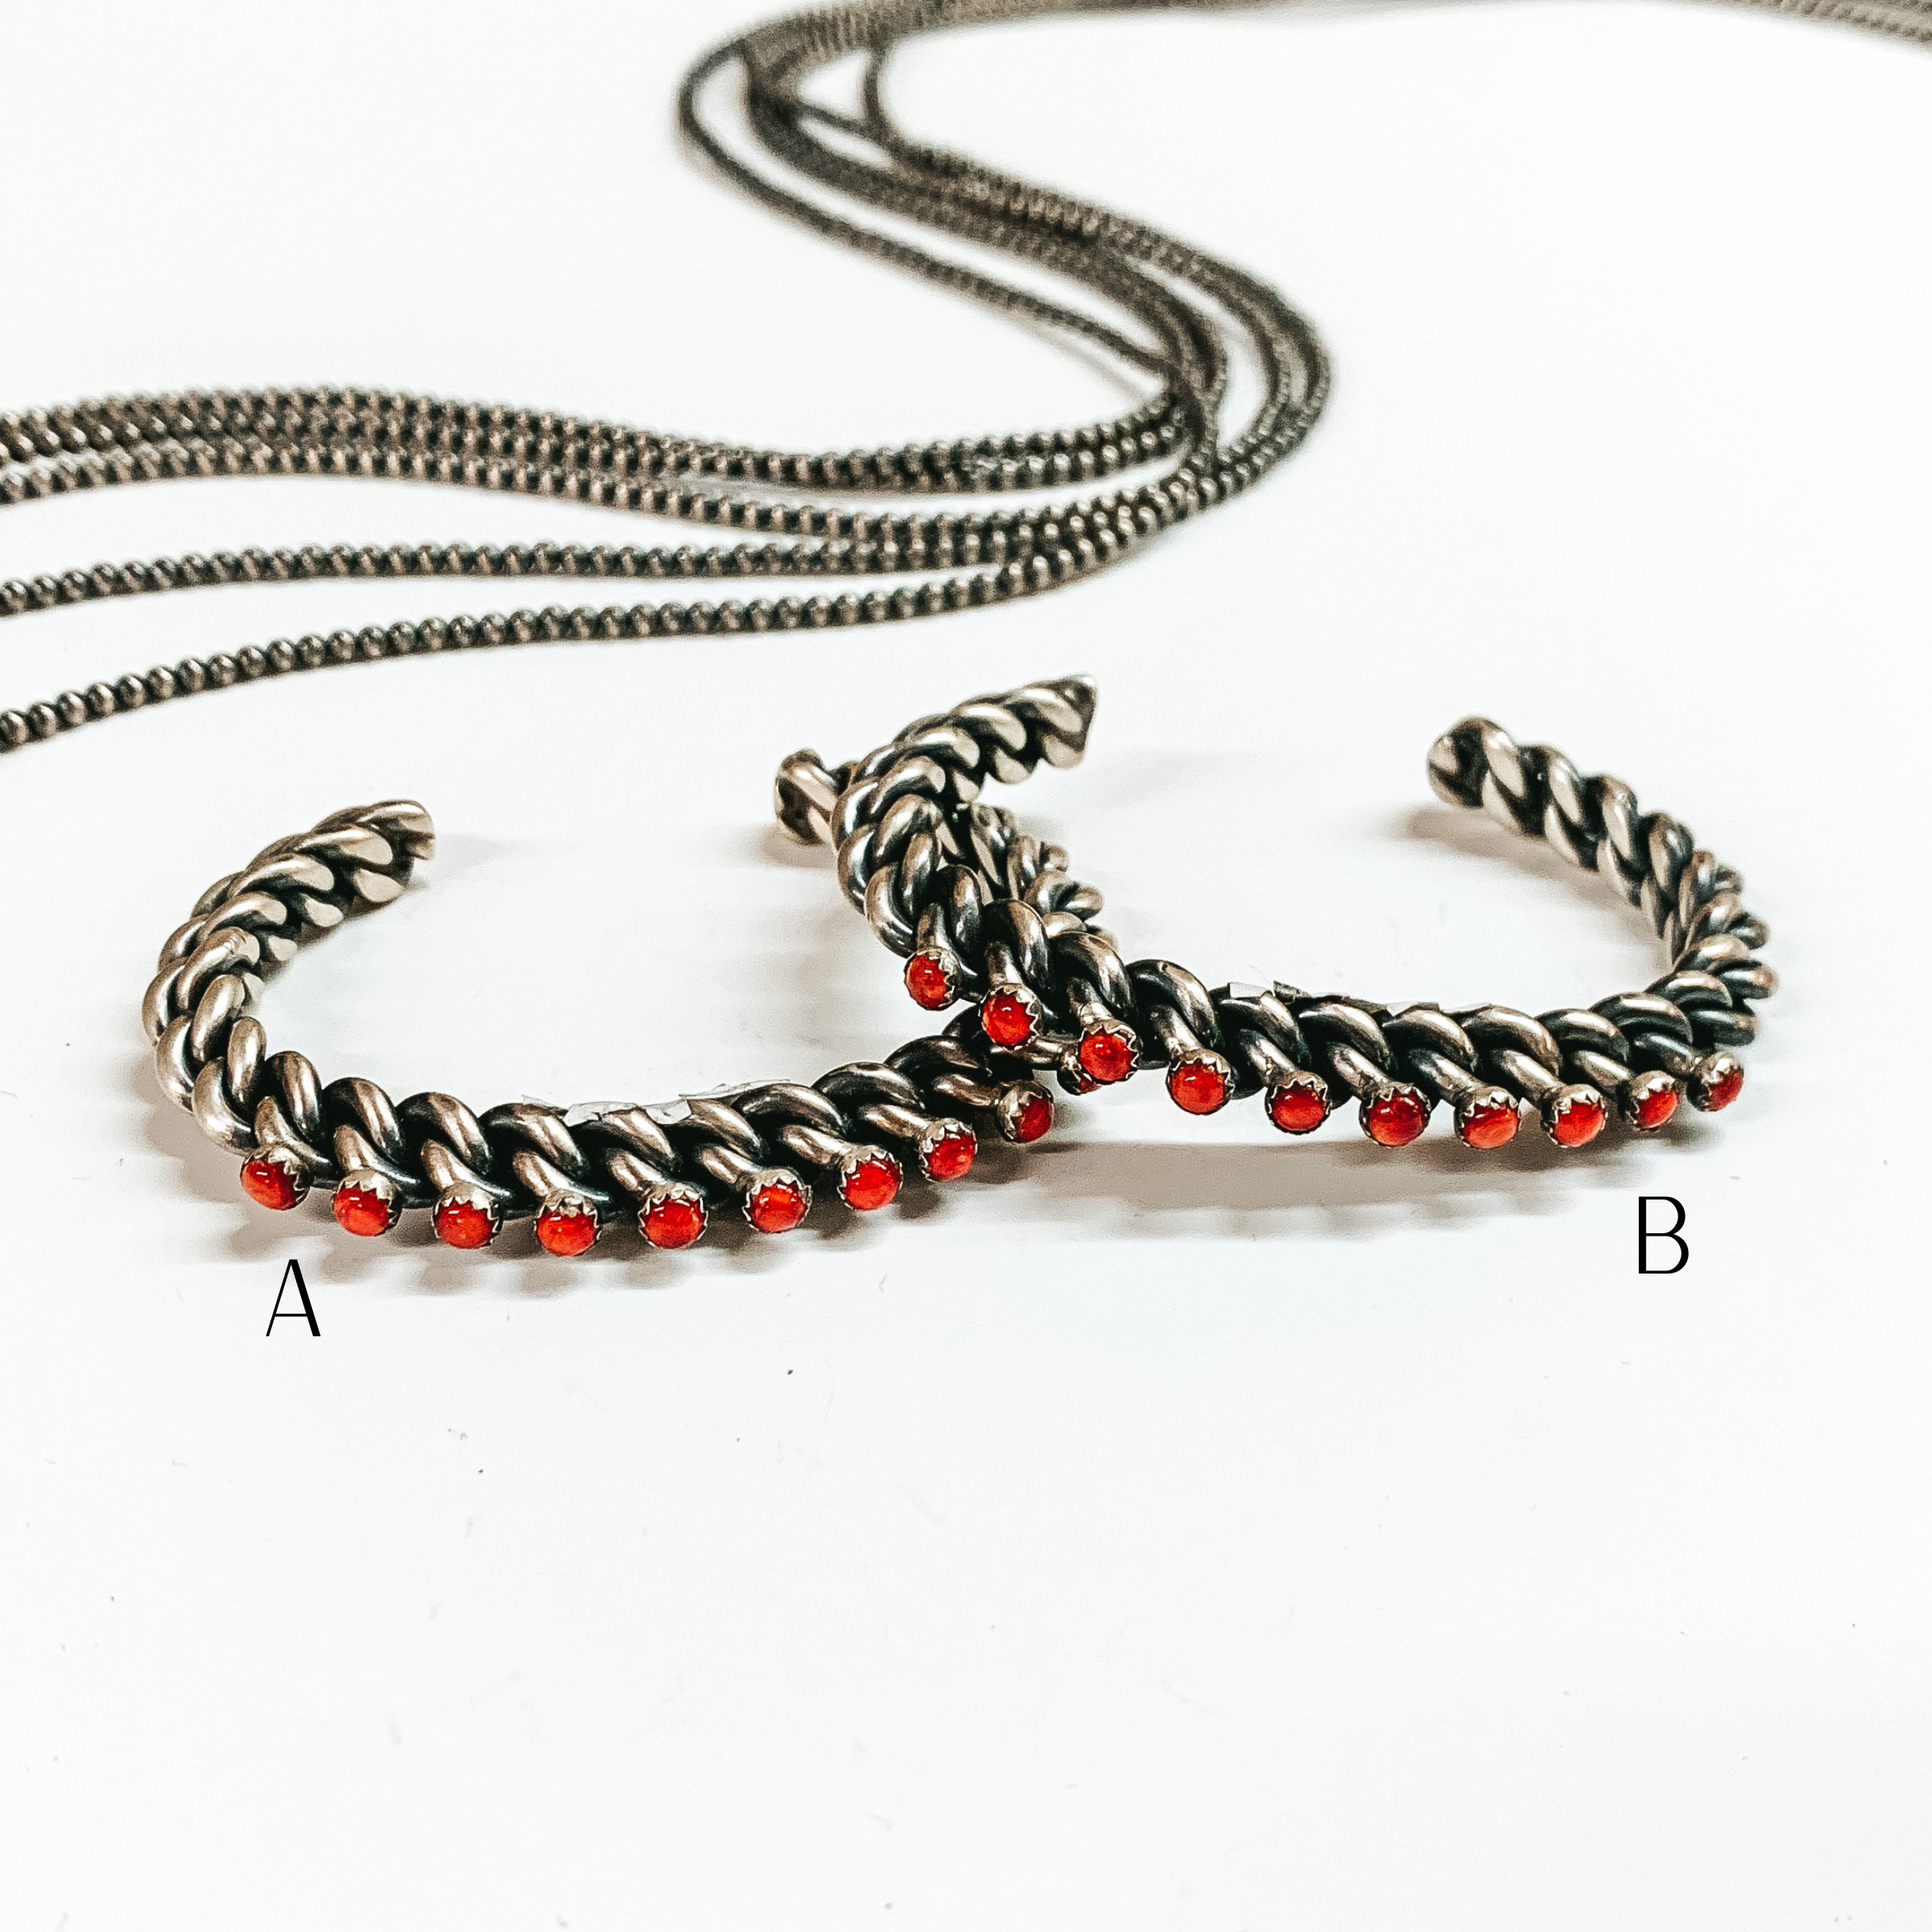 Navajo | Navajo Handmade Sterling Silver Braided Cuff with Ten Small Red Coral Stones - Giddy Up Glamour Boutique